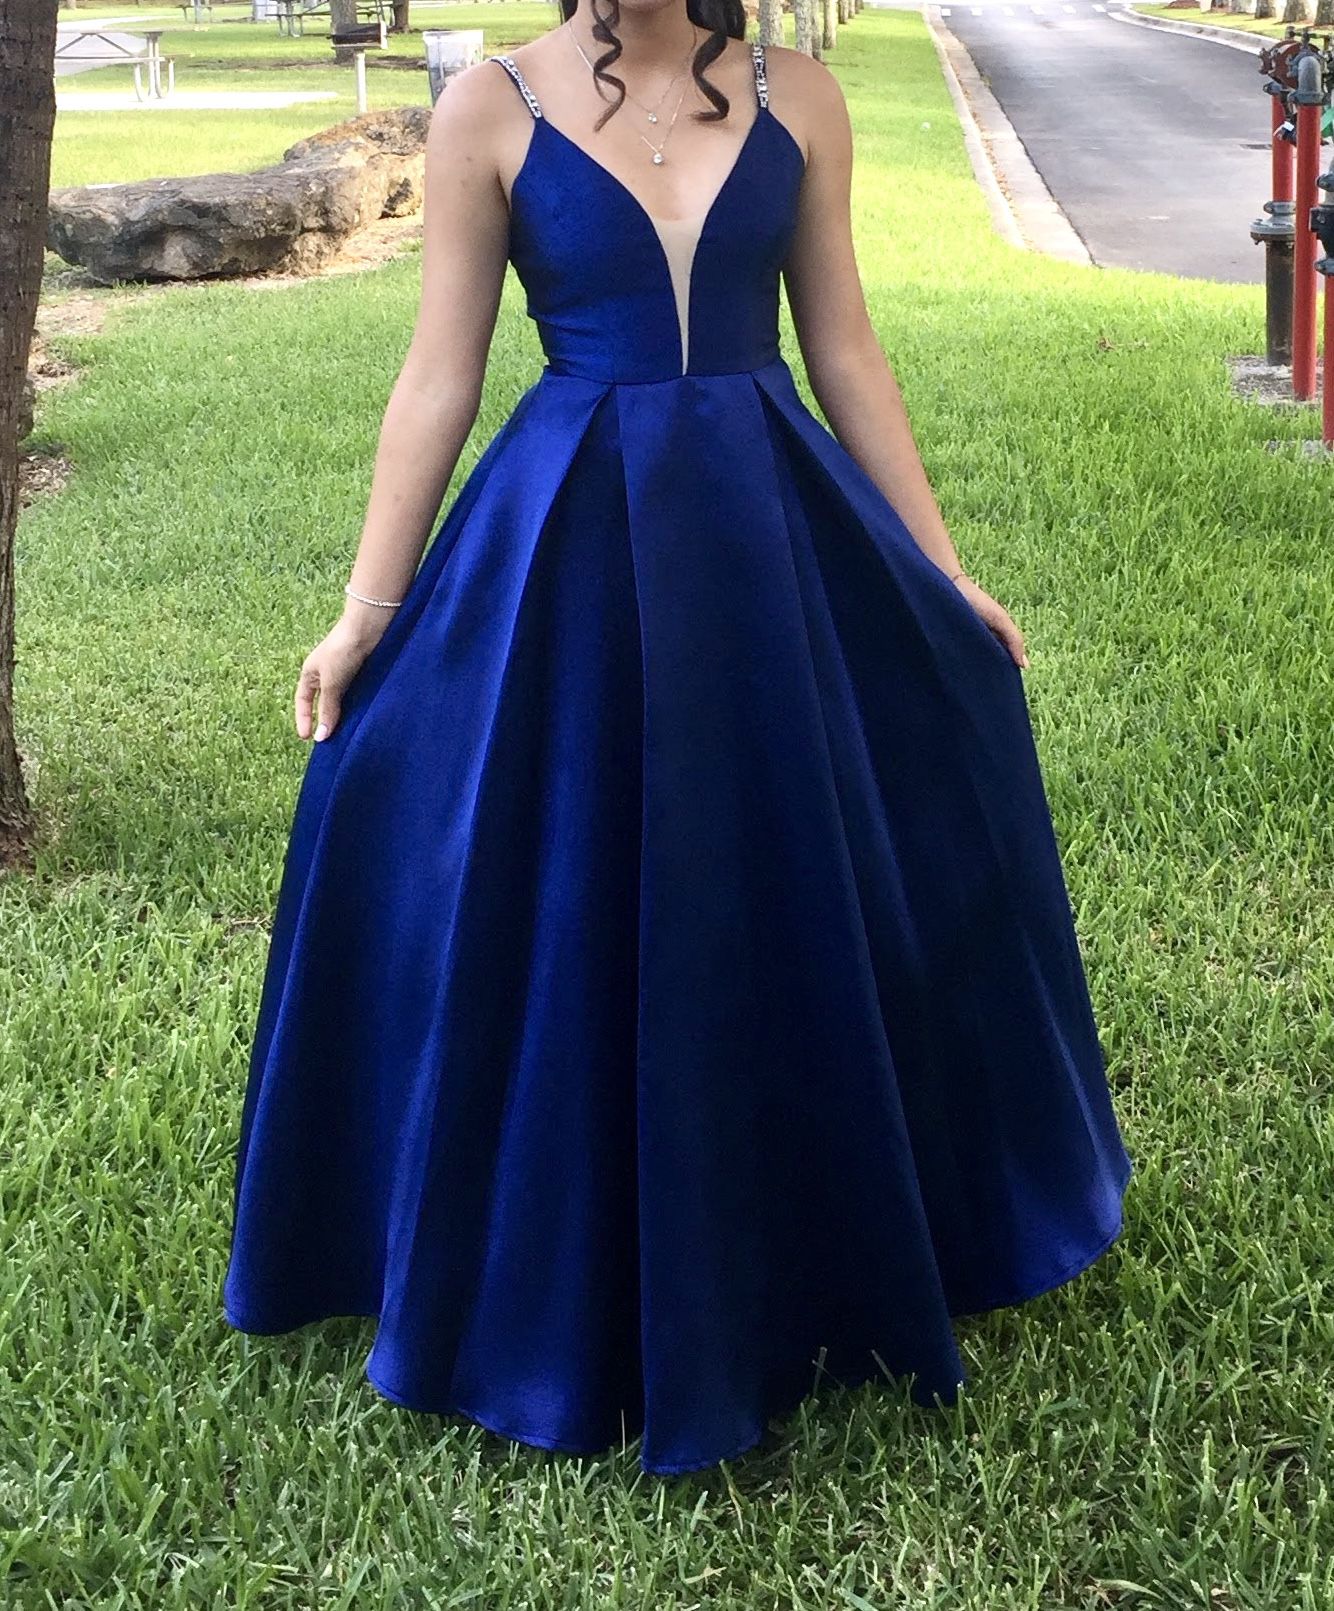 Blue Prom Dress Size 0  With Jewels On Straps 